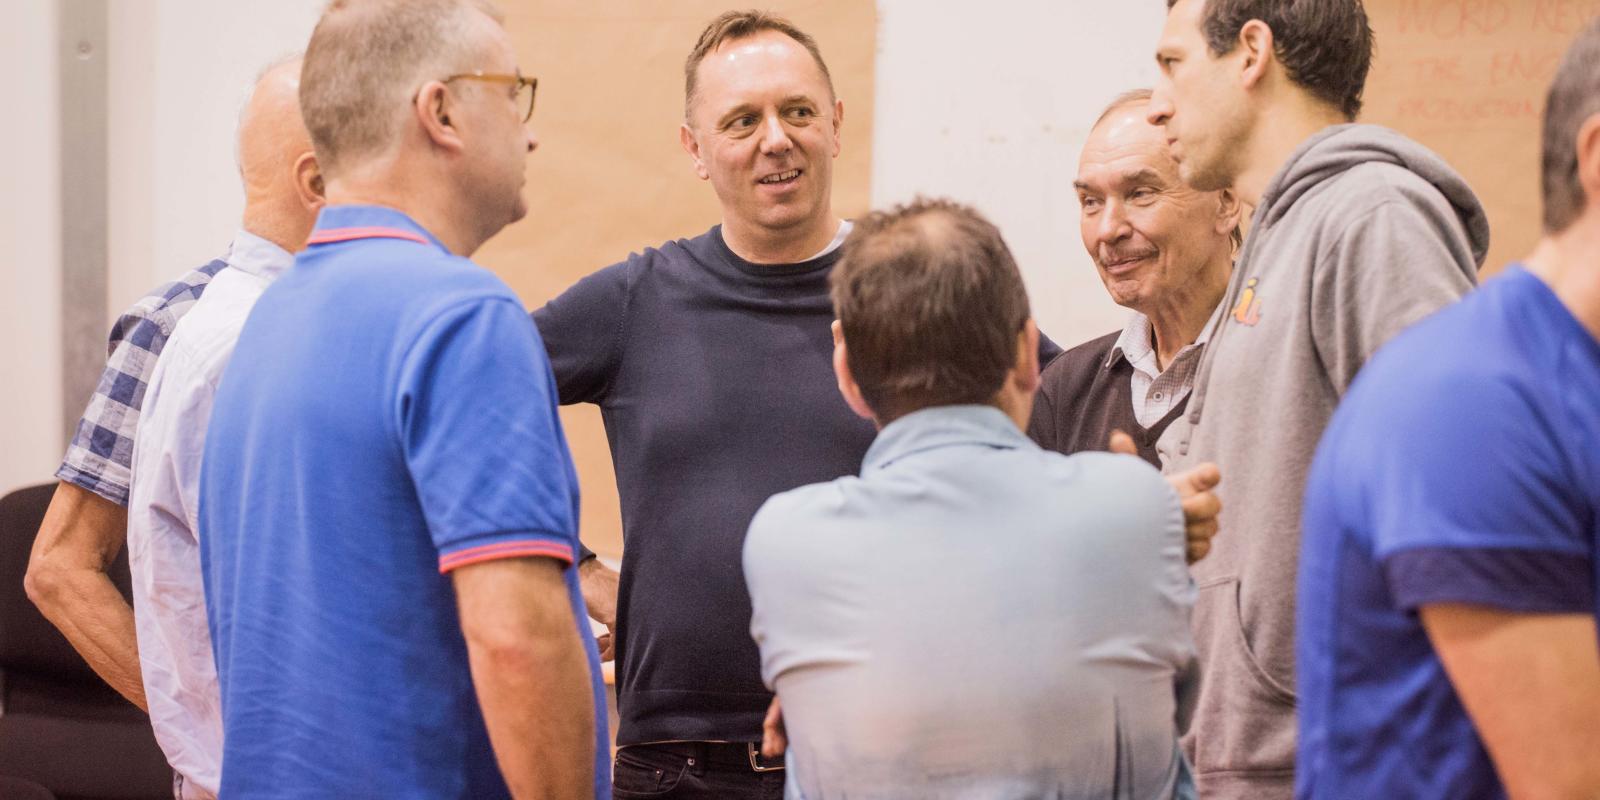 Group of men talking at Don Giovanni rehearsals